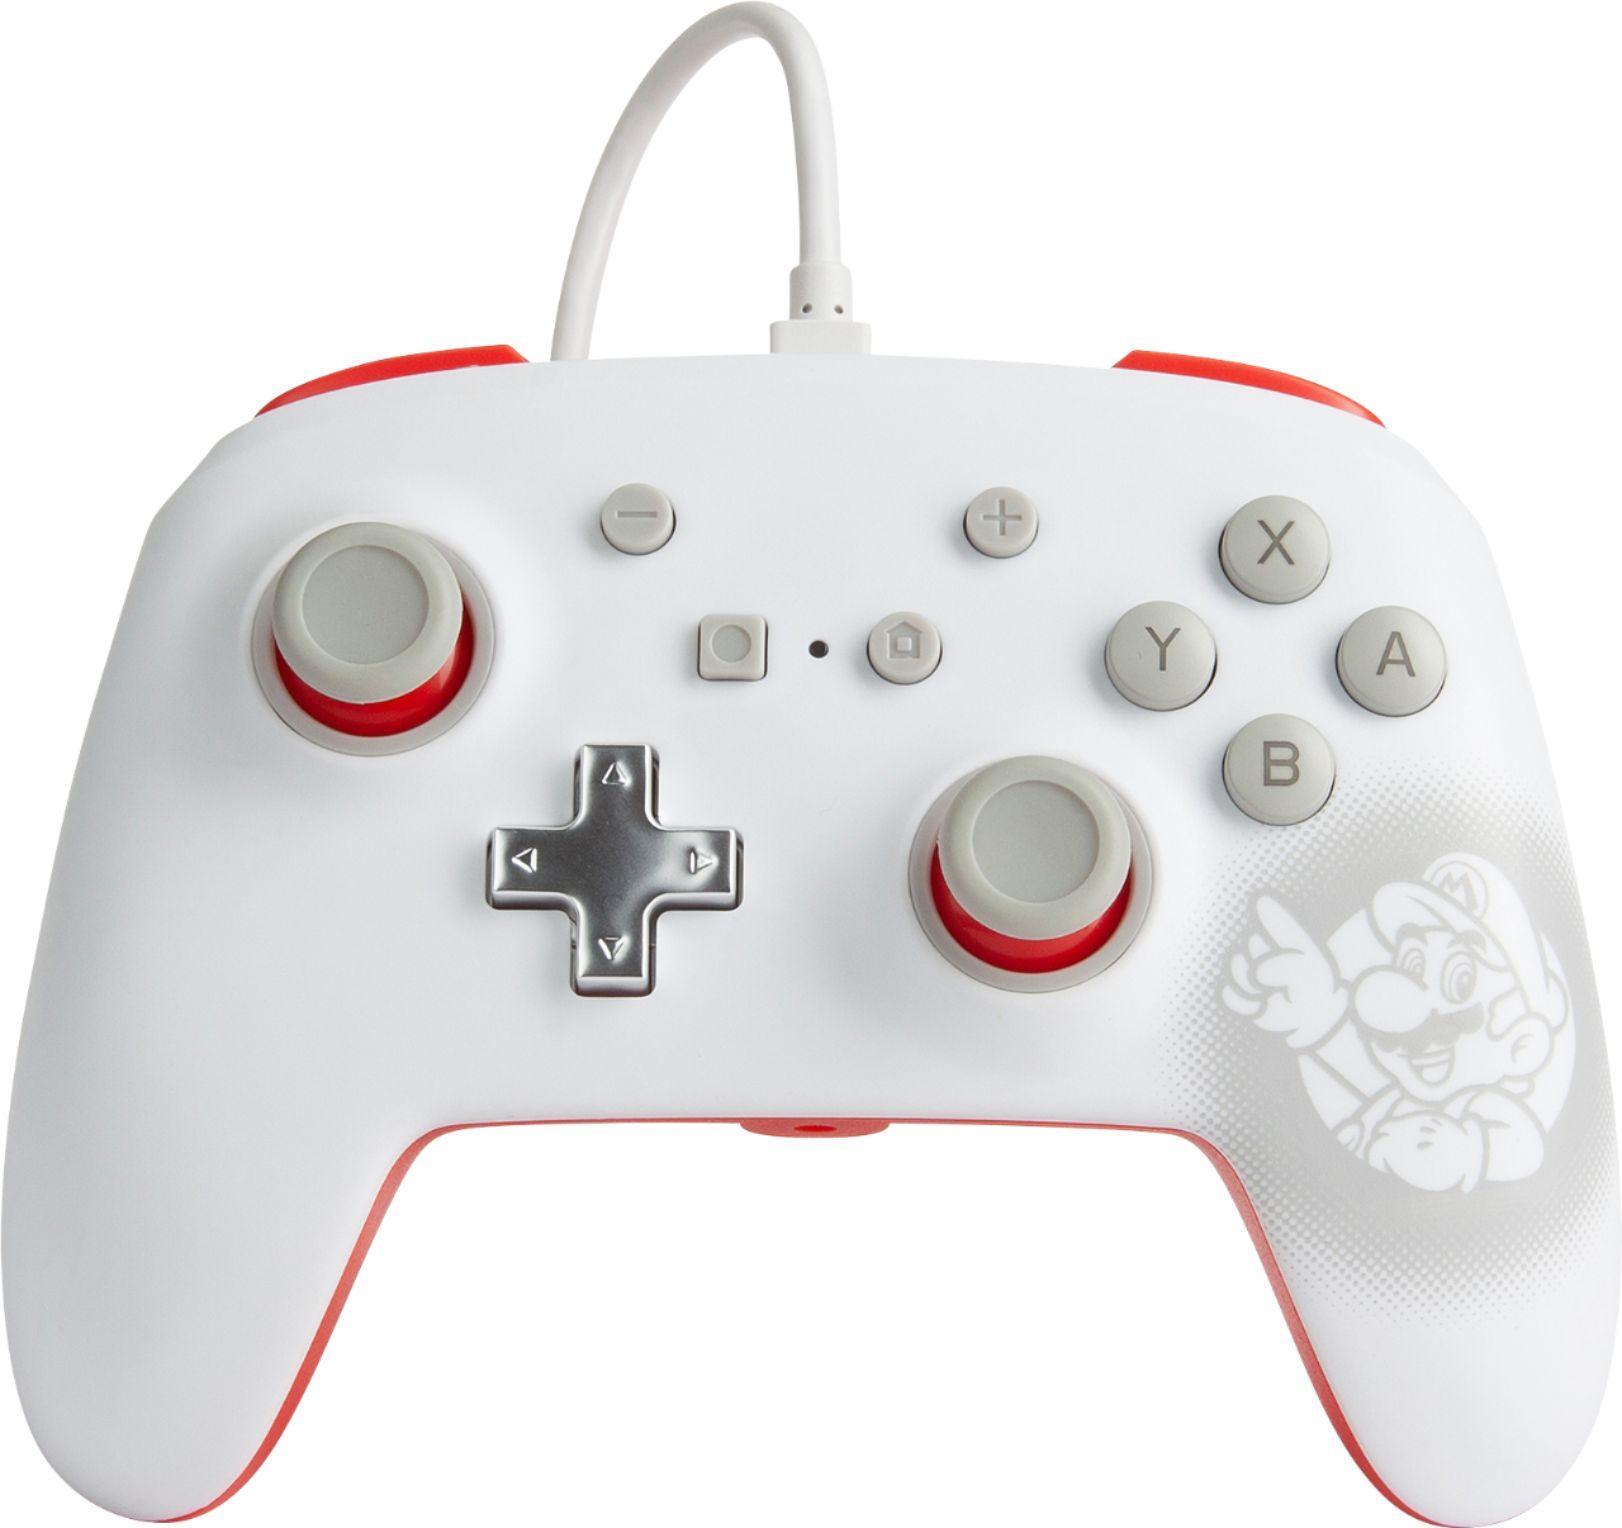 PowerA Enhanced Wired Mario White Controller for Nintendo Switch for $14.99